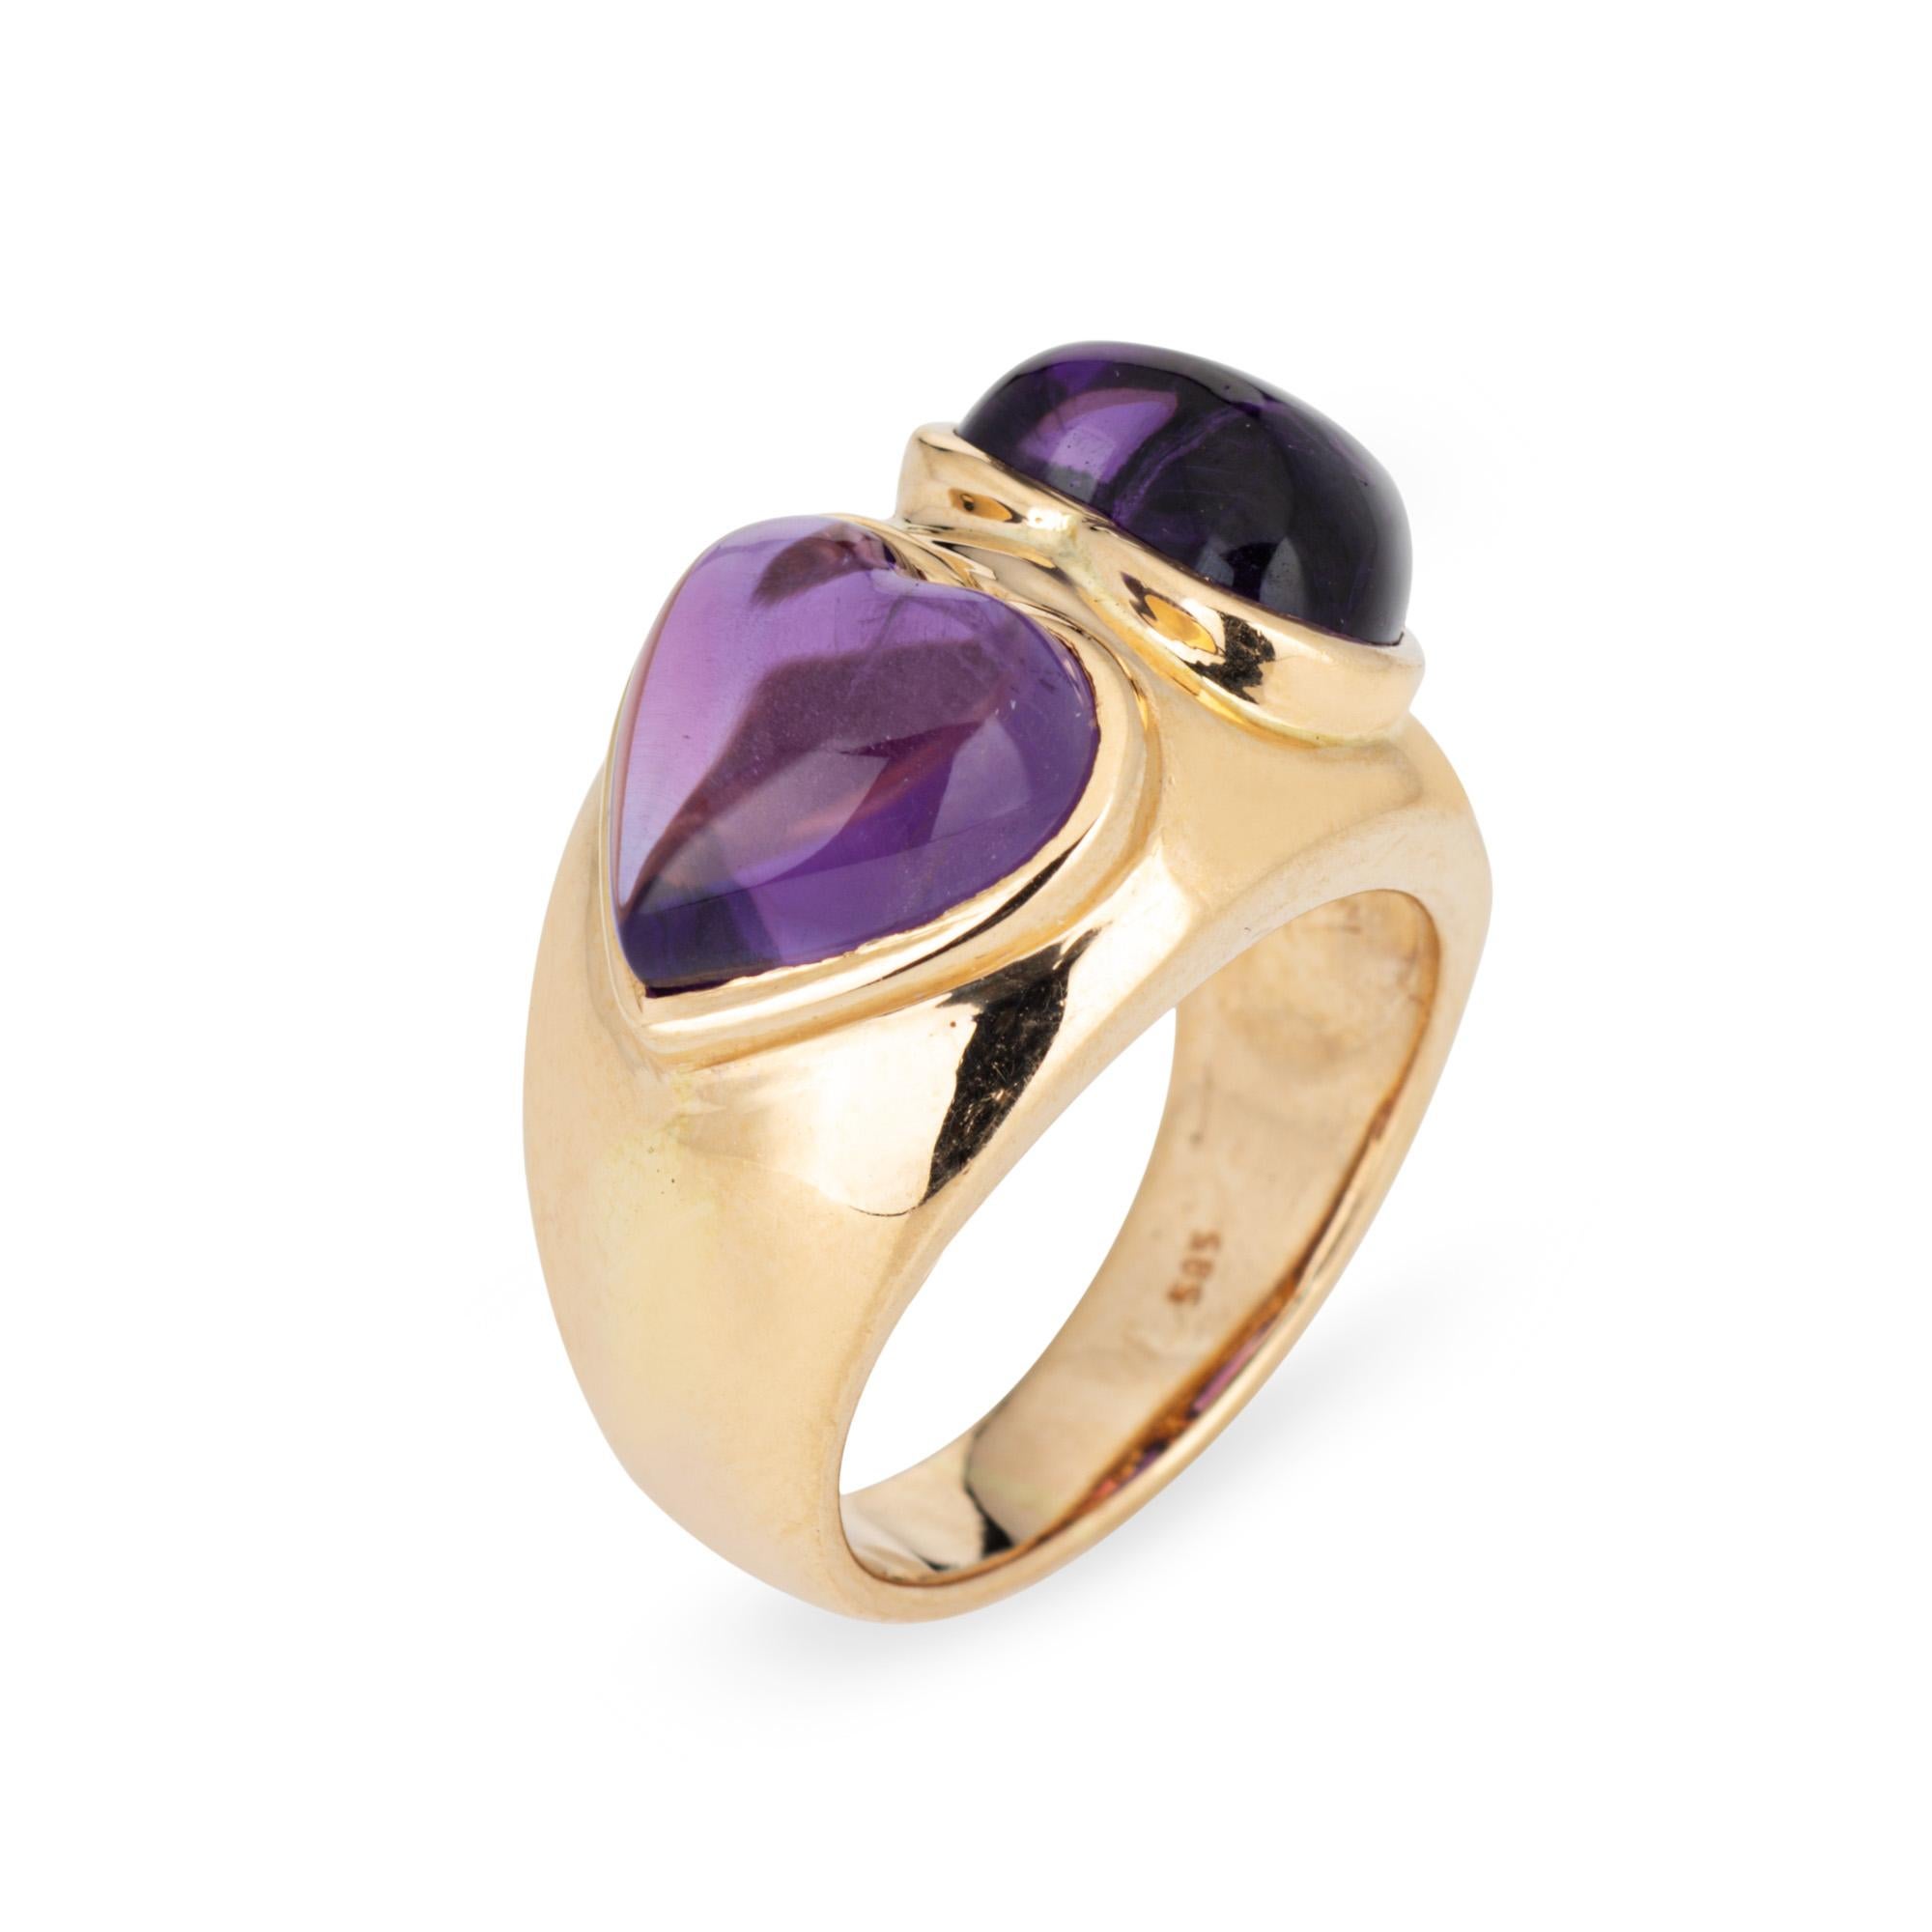 Stylish double heart amethyst ring crafted in 14 karat yellow gold (circa 1980s). 

Cabochon cut amethysts each measure 10mm. The amethysts are in very good condition and free of cracks or chips.  

The cabochon cut rich royal purple amethysts are